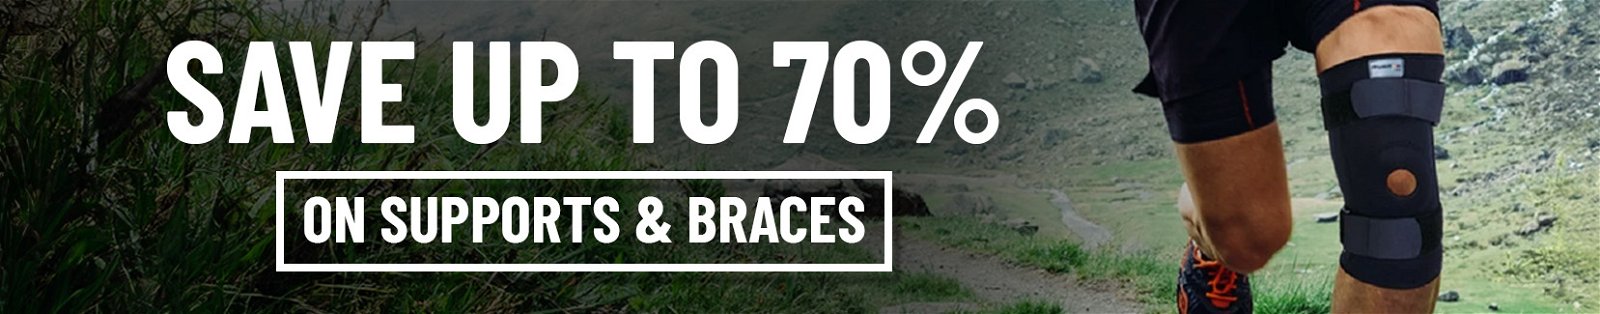 save up to 70% on supports & braces